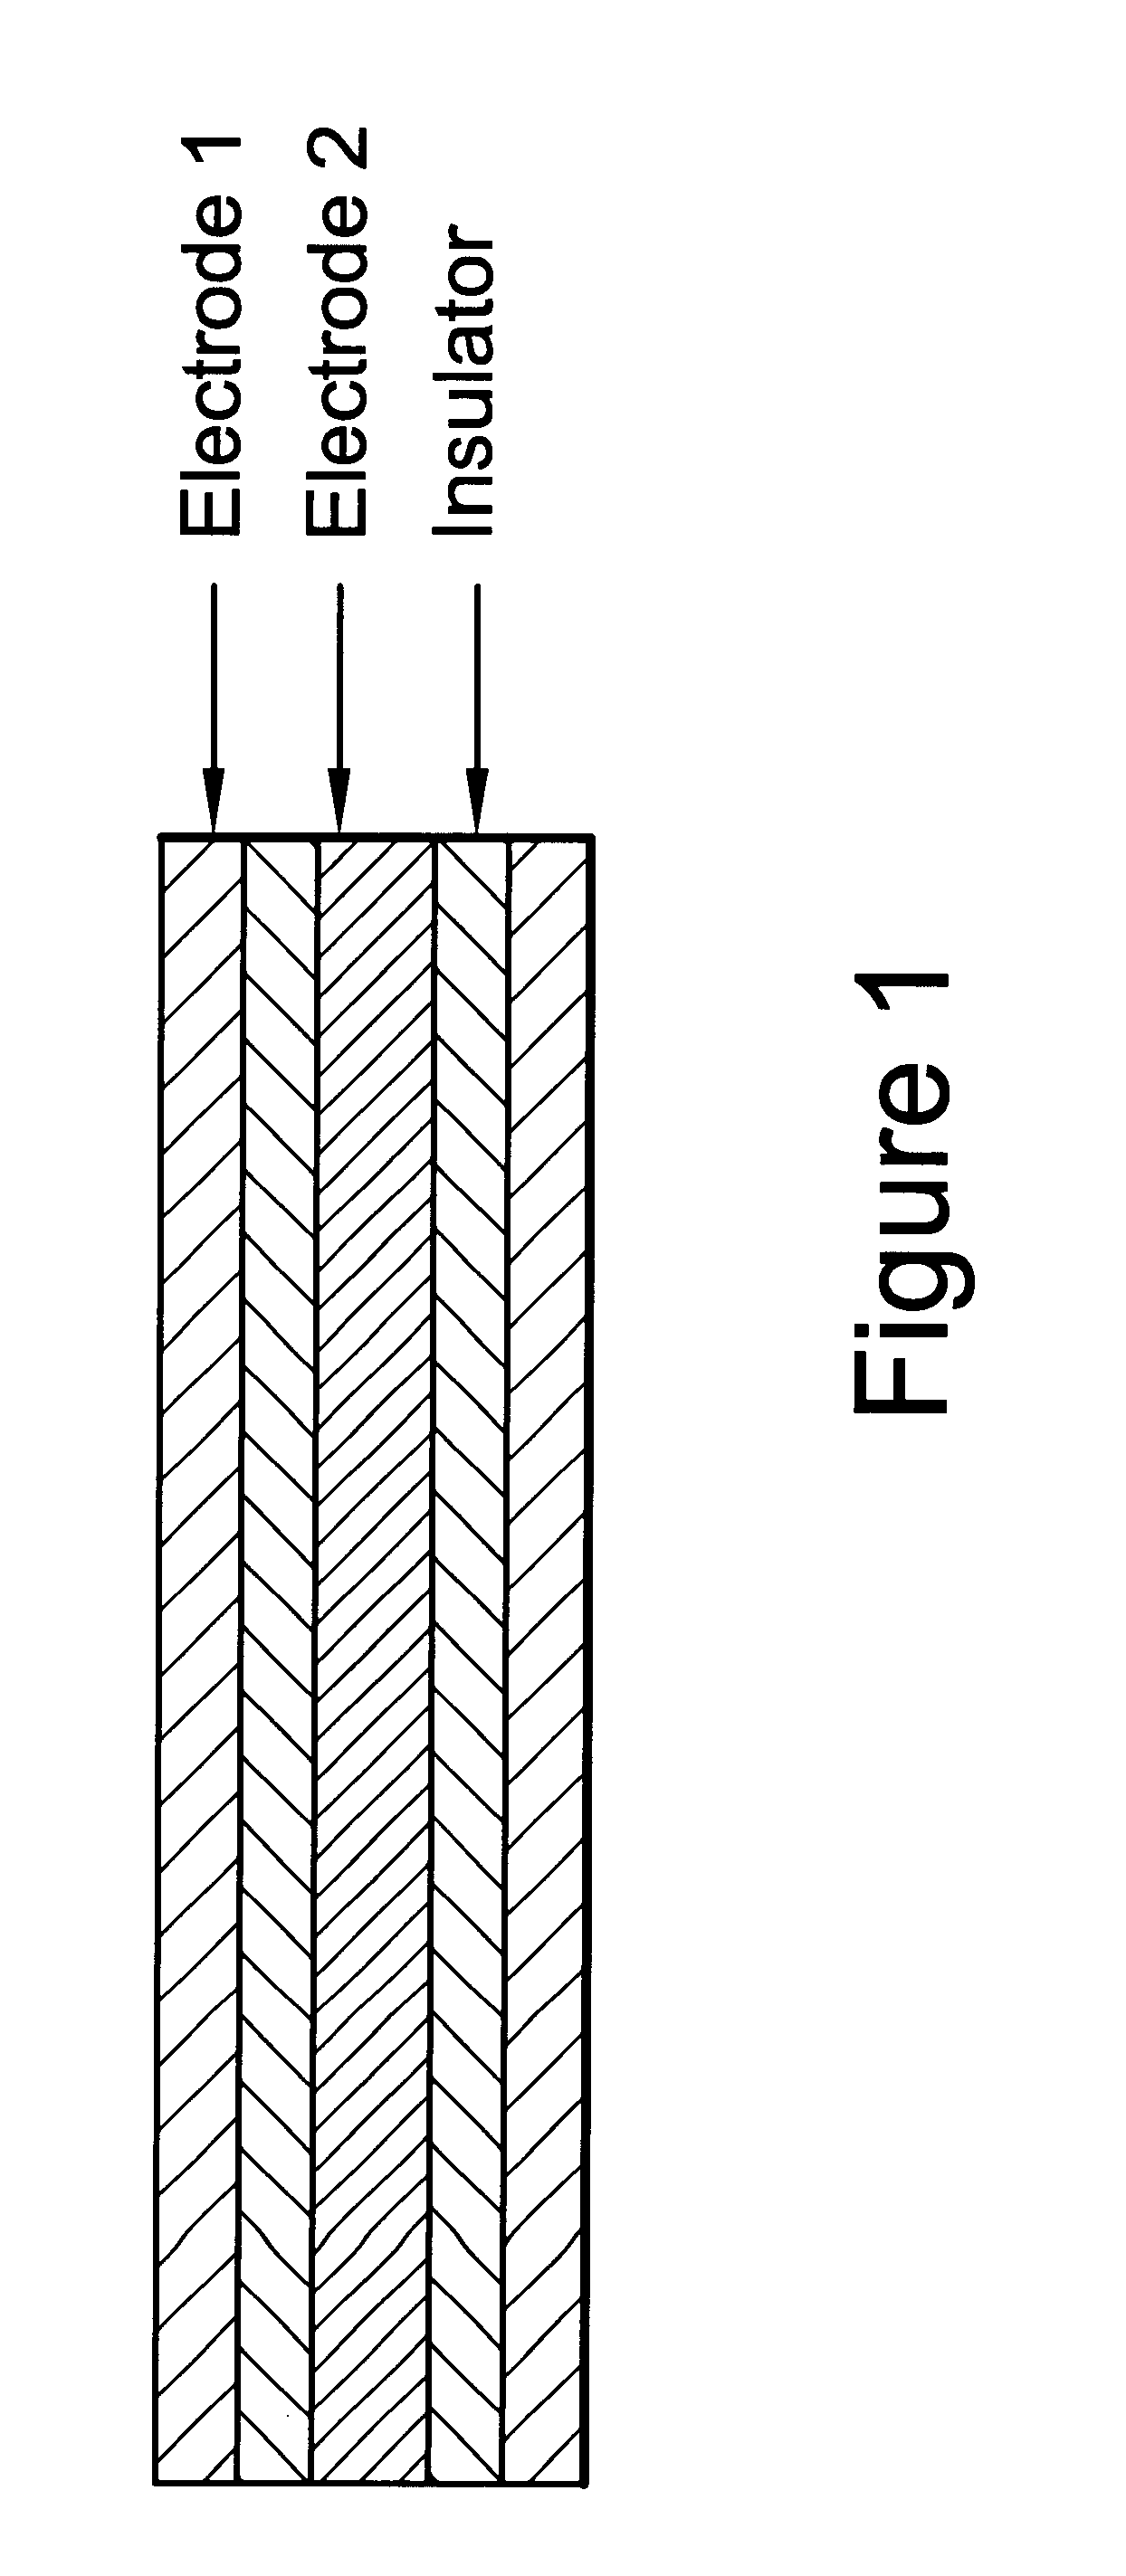 Apparatus and method for measuring the moisture level within enamel dentine or tooth tissue